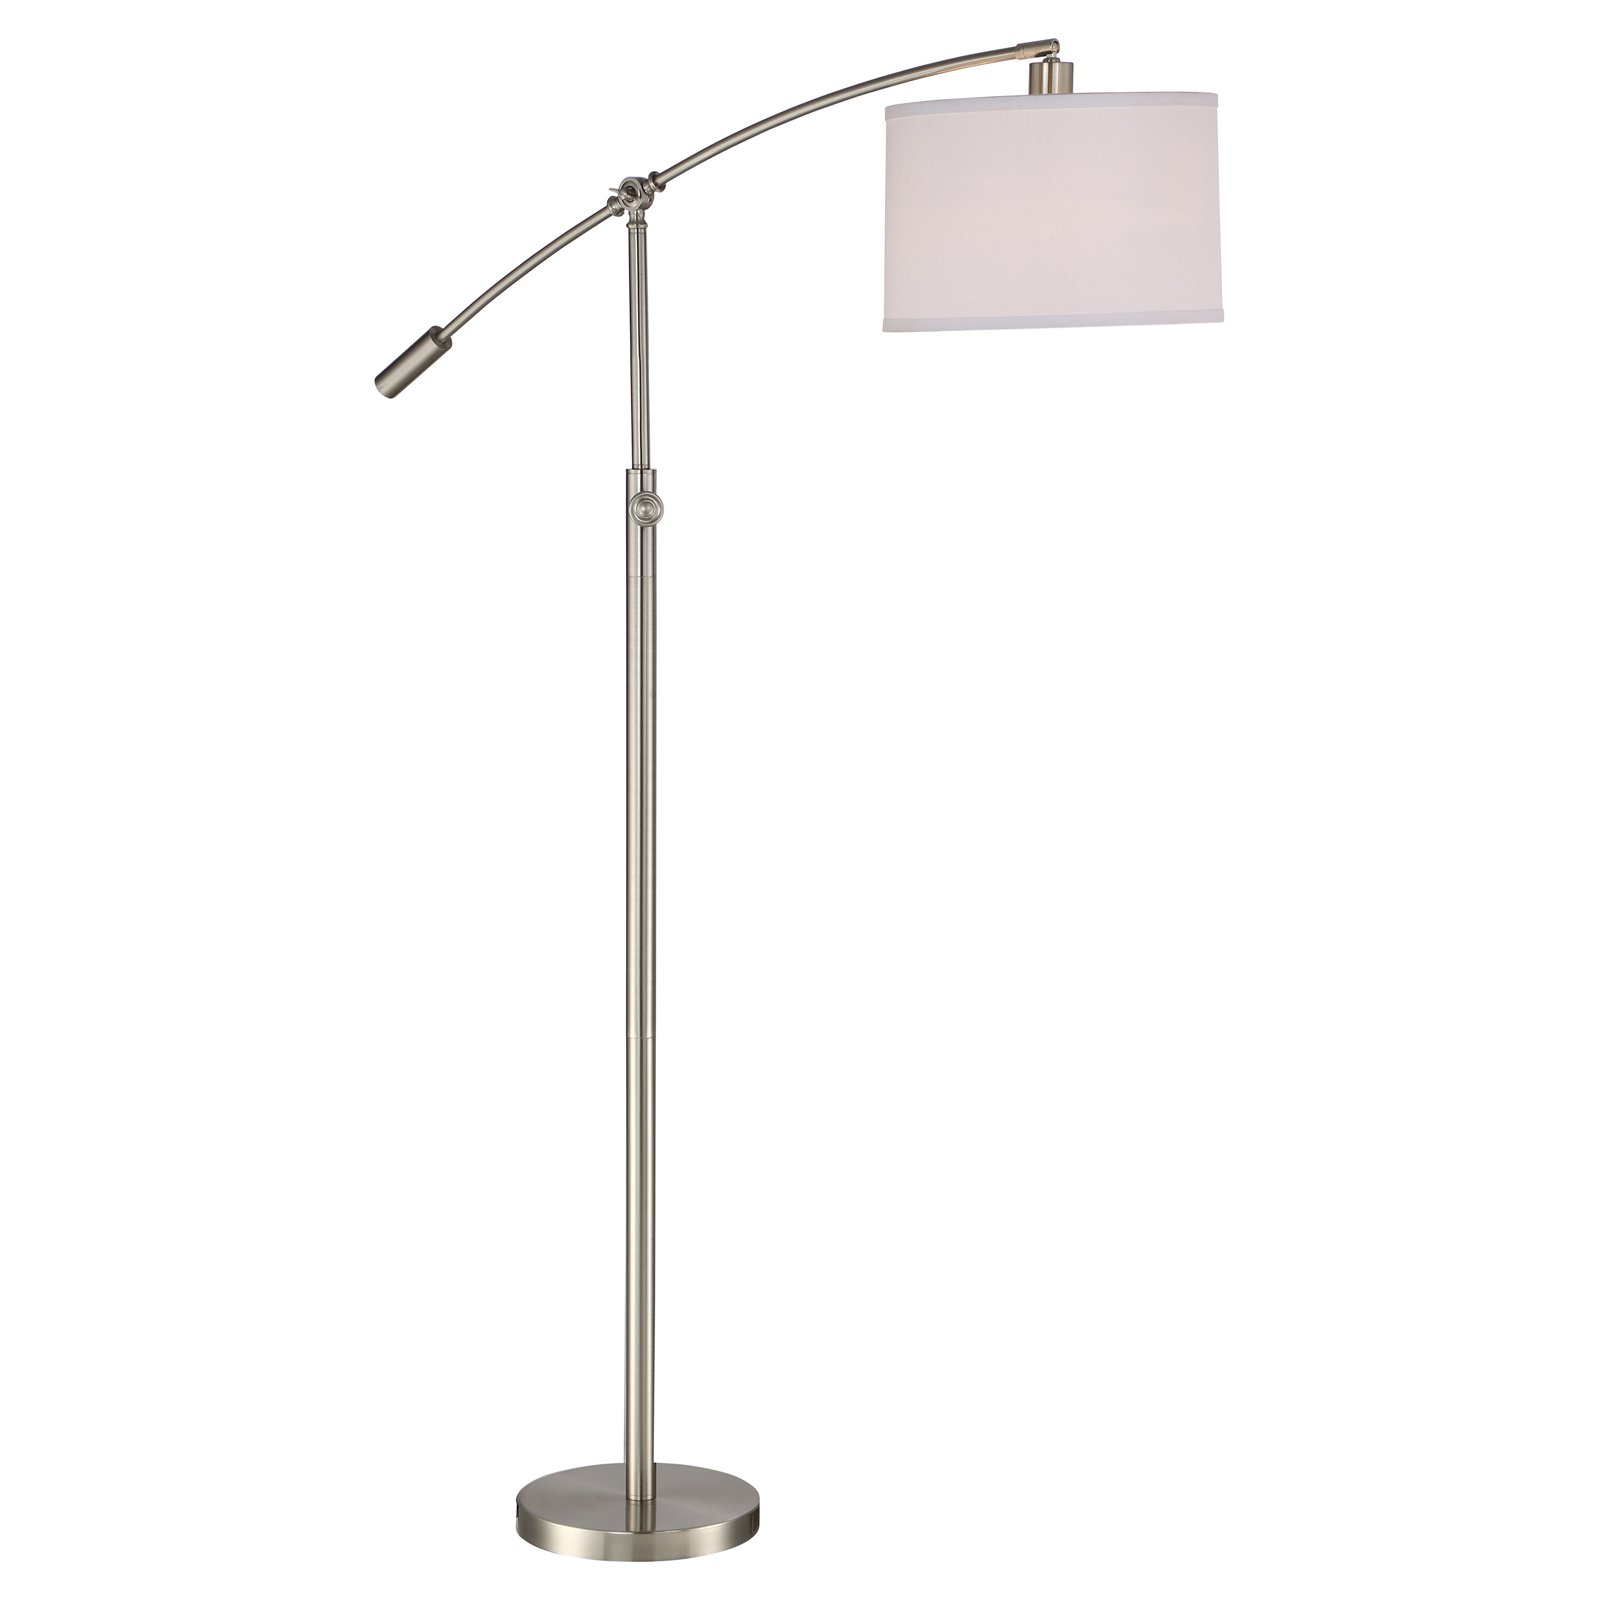 Quoizel Cft9364bn Floor Lamp Walmart pertaining to size 1600 X 1600